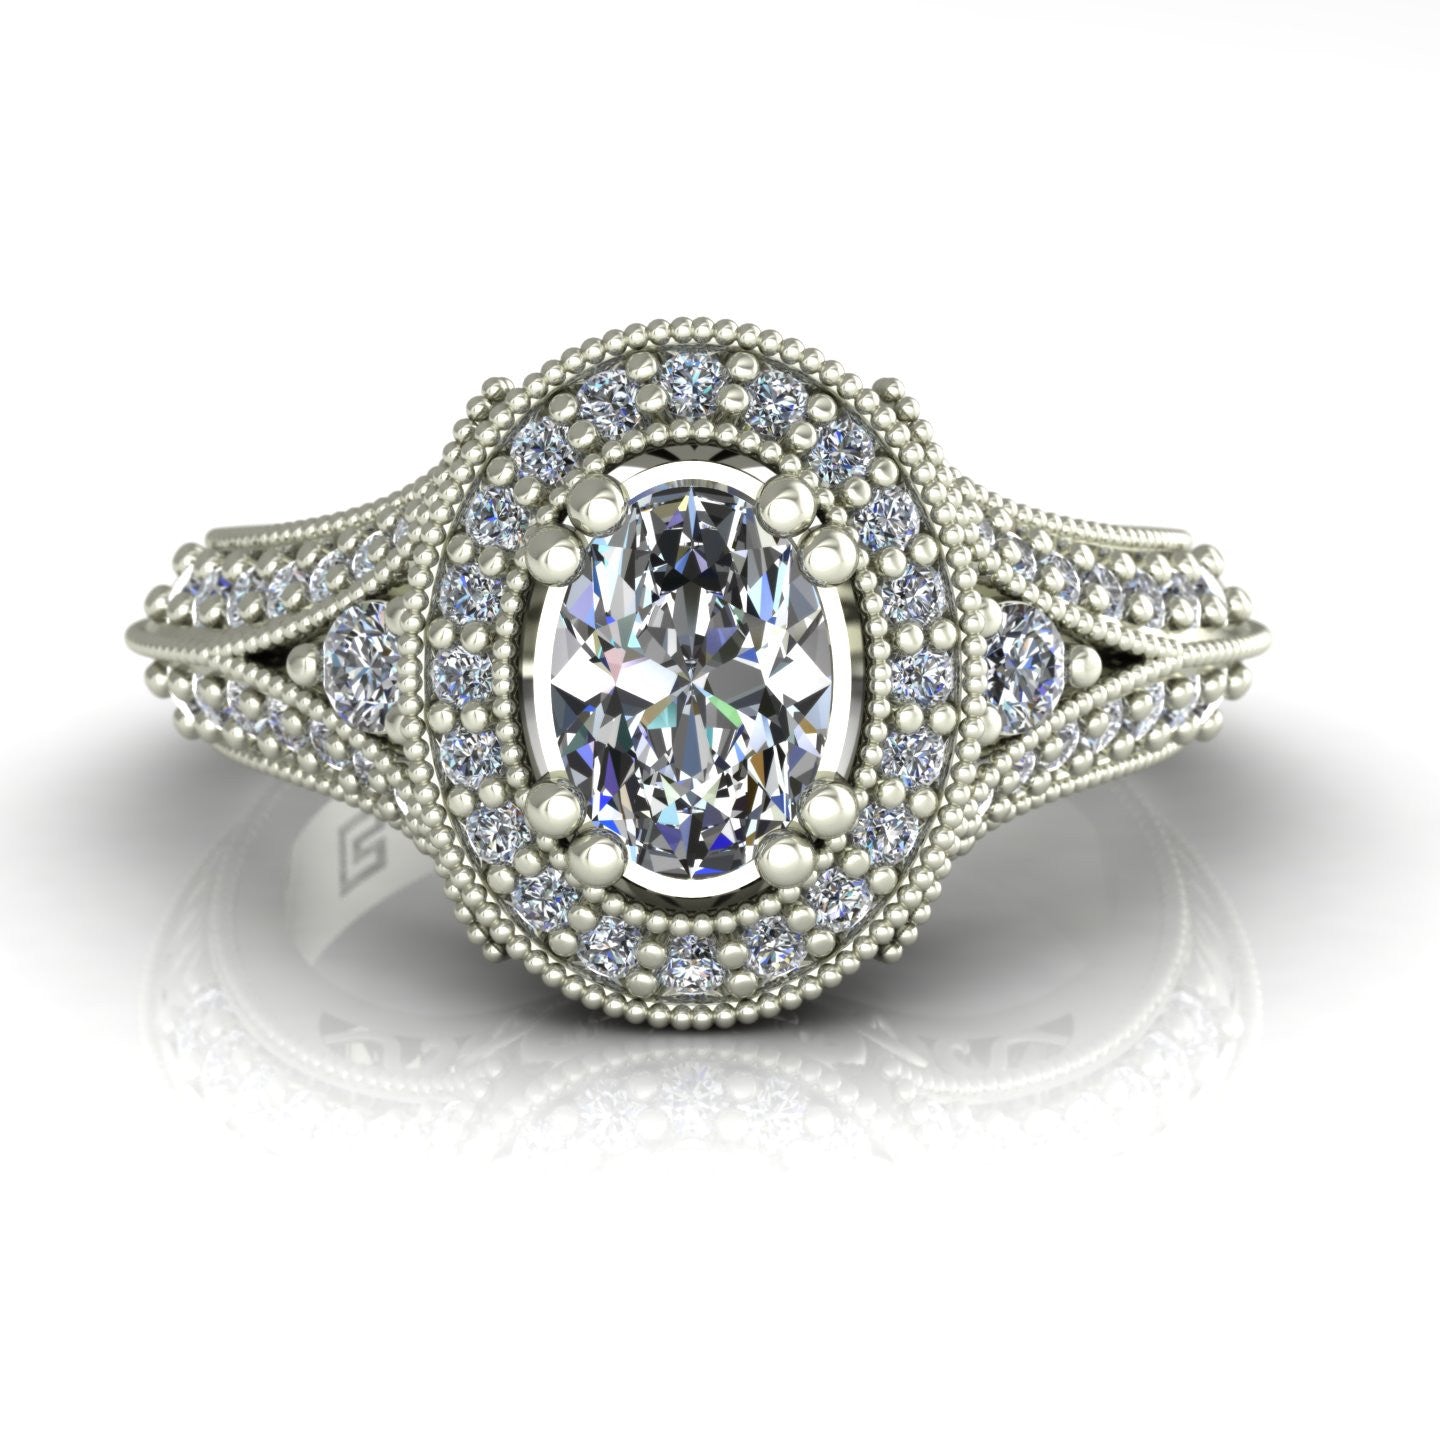 oval diamond engagement ring with halo and split shank in 14k white gold - Charles Babb Designs - top view